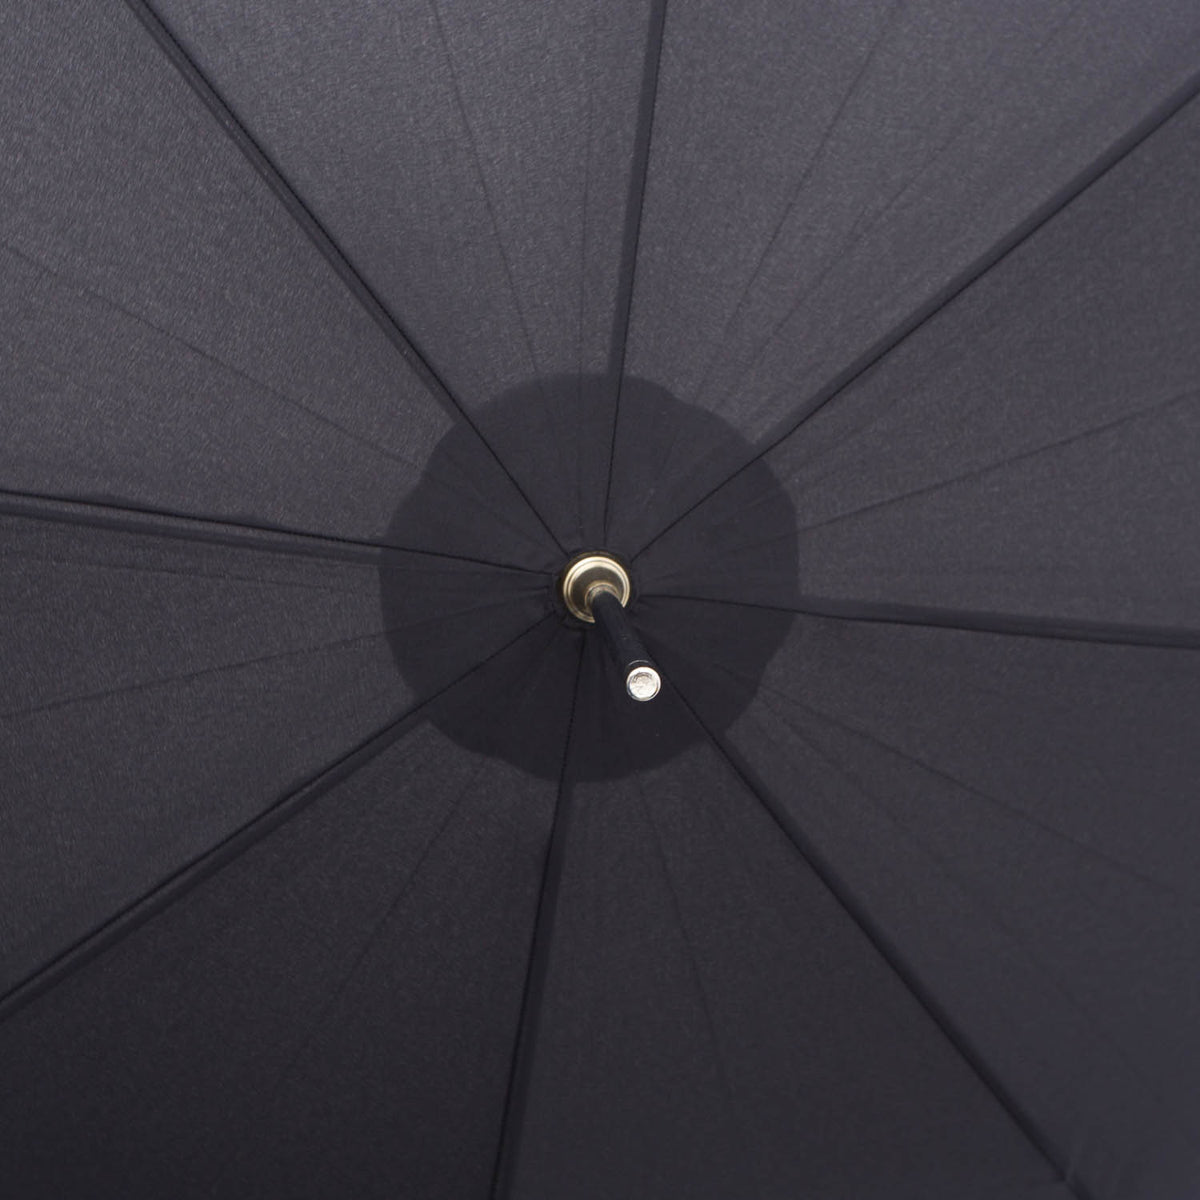 A close up of a Mario Talarico Black Canopy Umbrella with Dog Horn Handle by KirbyAllison.com on a white background.